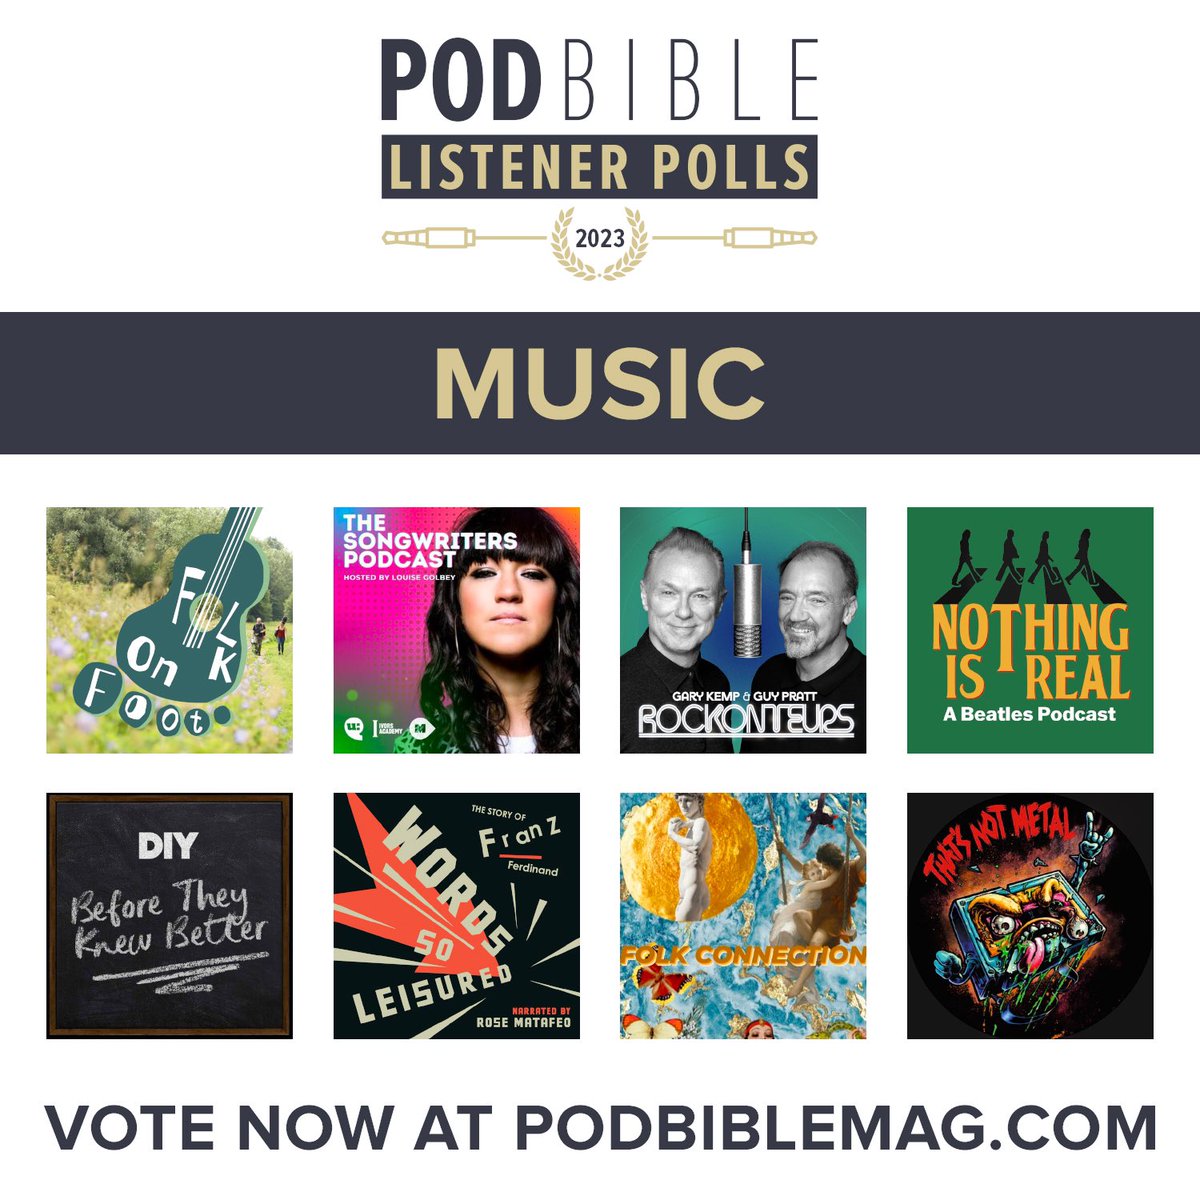 We’ve been shortlisted as Best Music Podcast in the annual @podbible listener poll. It’s a public vote, so please cast your vote for us at podbiblemag.com voting closes on Dec31st @garyjkemp @guypratt